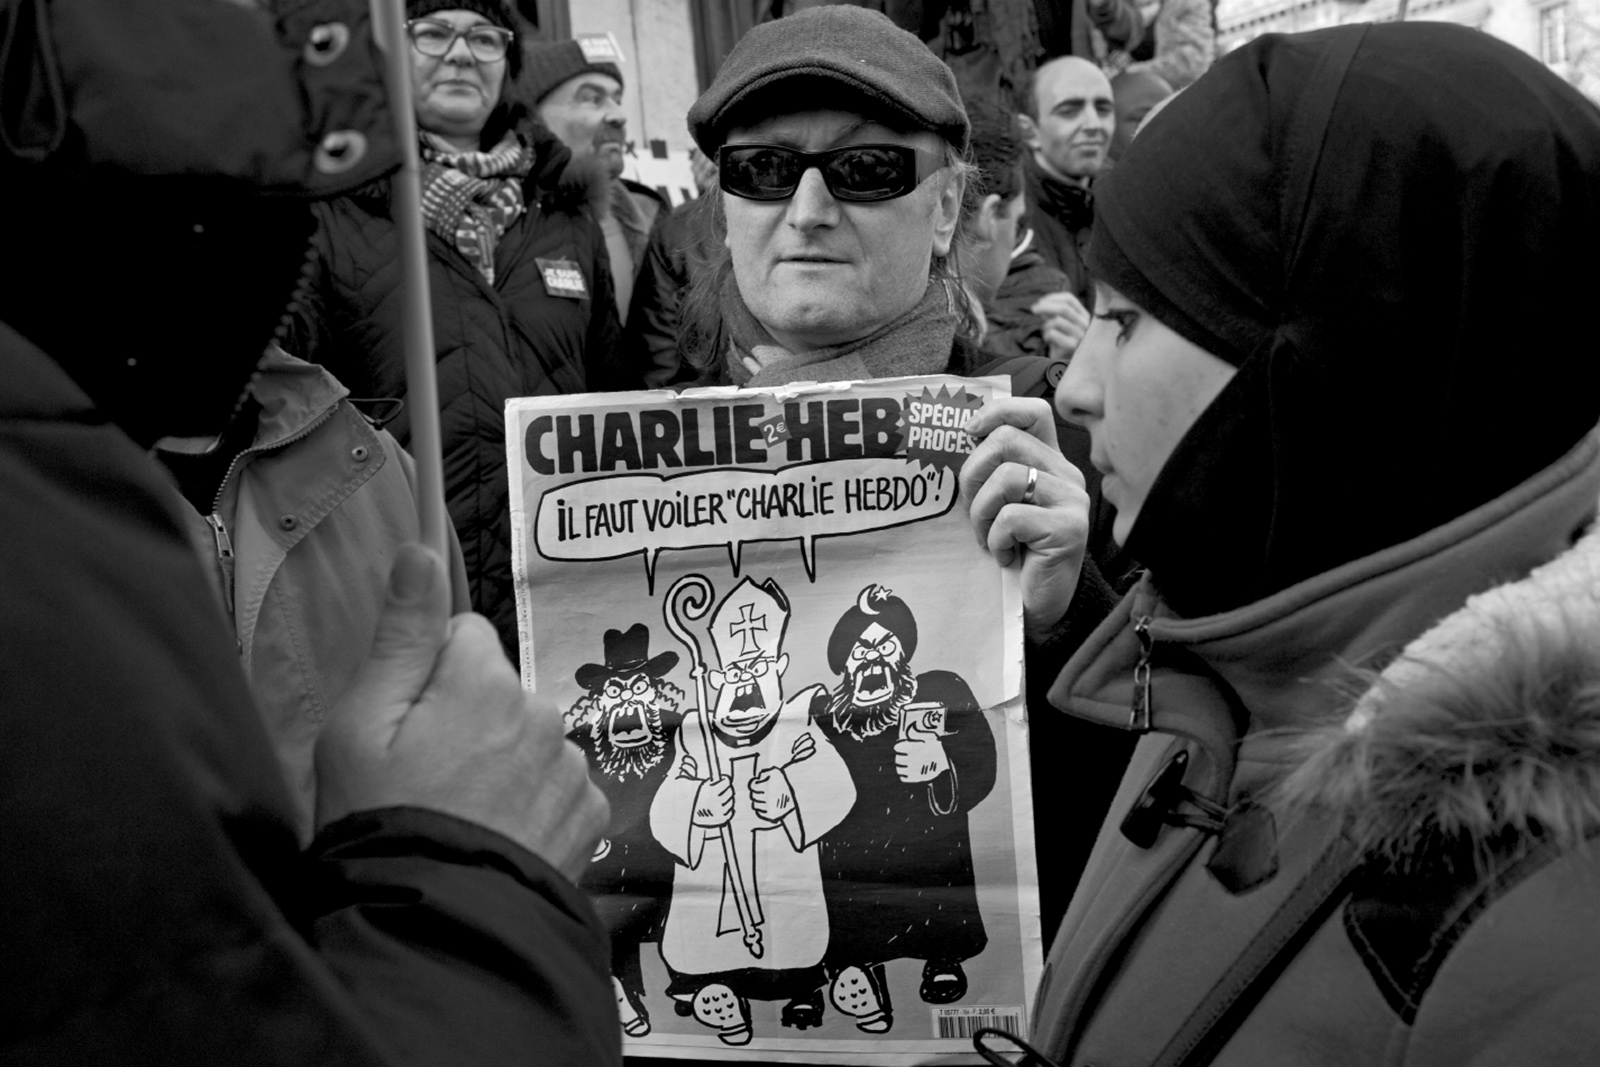 A demonstrator with an issue of Charlie Hebdo at the march against terrorism, Paris, January 11, 2015. The cartoon on the cover shows a Jew, a Catholic, and a Muslim demanding that ‘“Charlie Hebdo” must be veiled!’